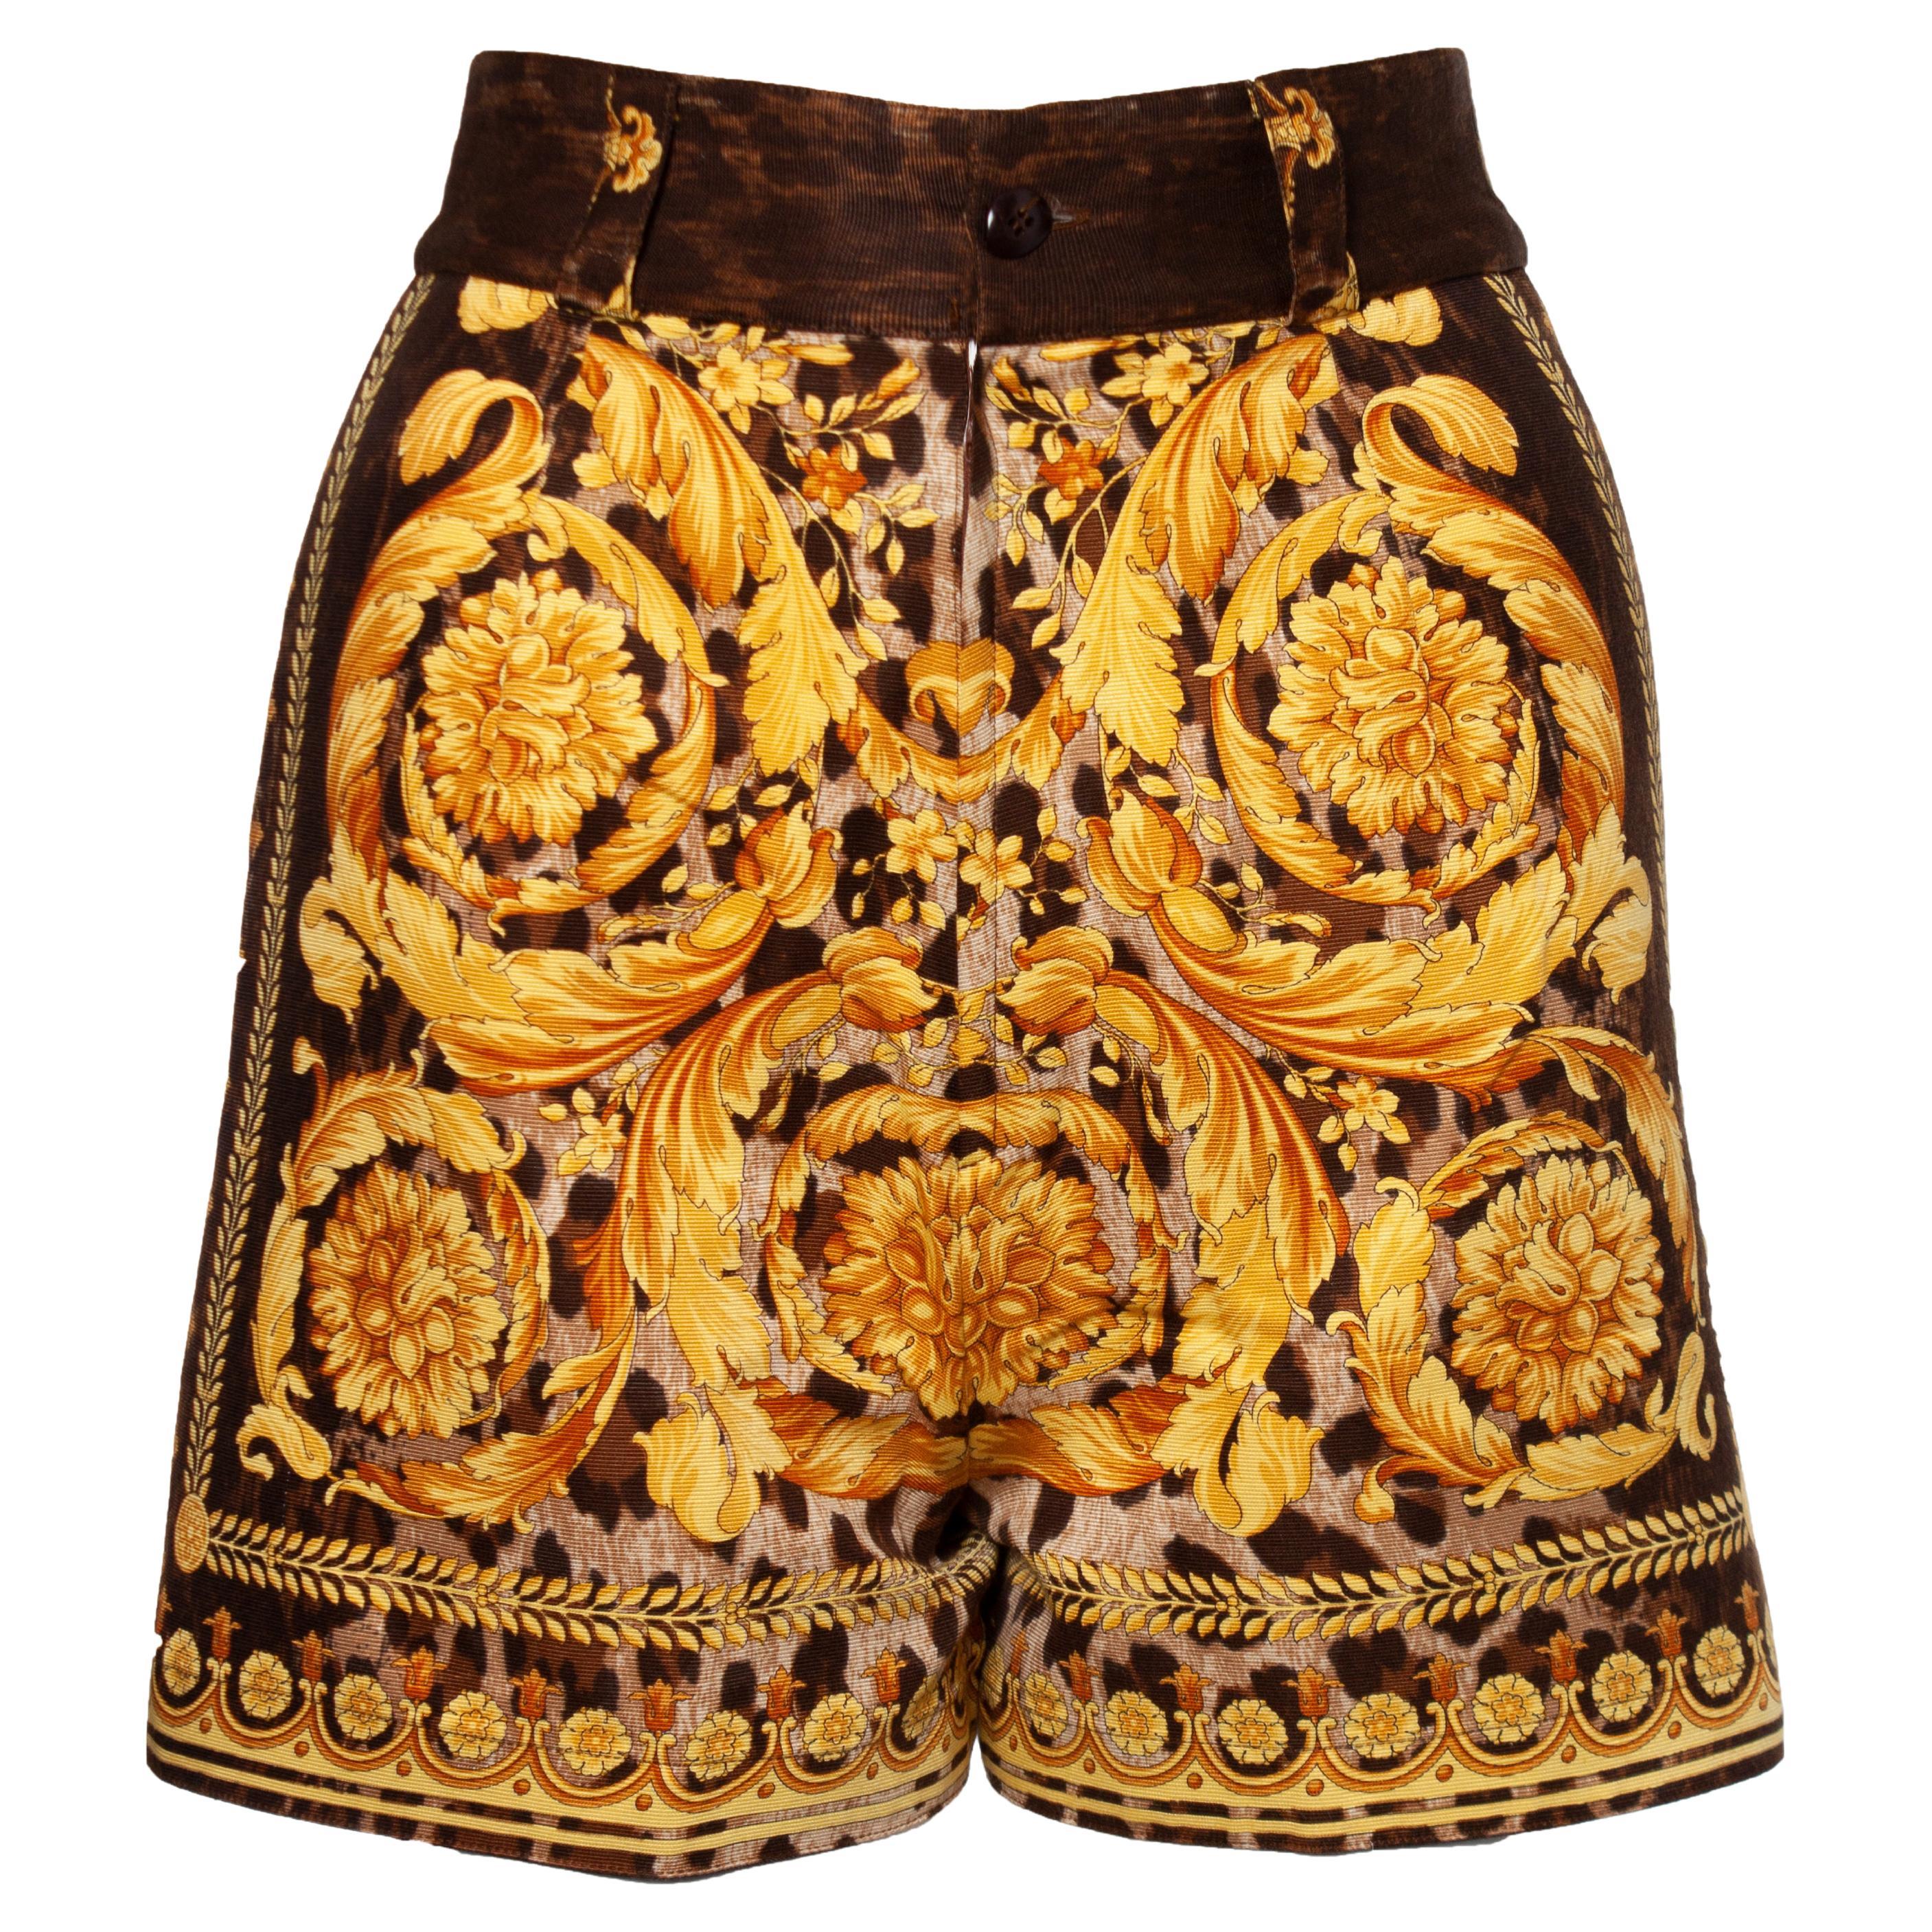 Gianni Versace Couture, Barocco printed shorts